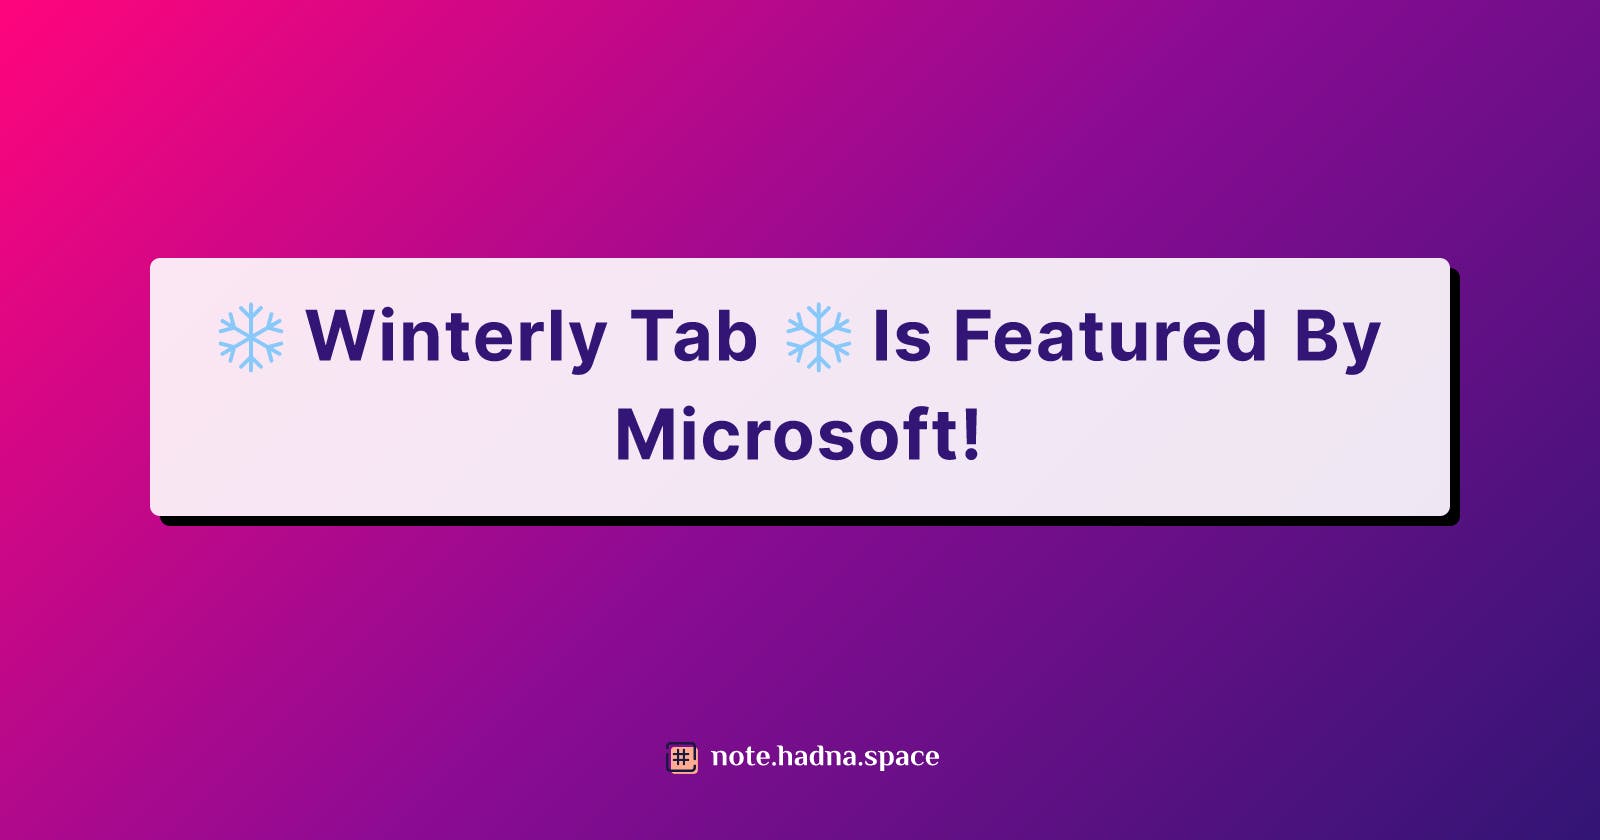 ❄️ Winterly Tab ❄️ Is Featured By Microsoft!